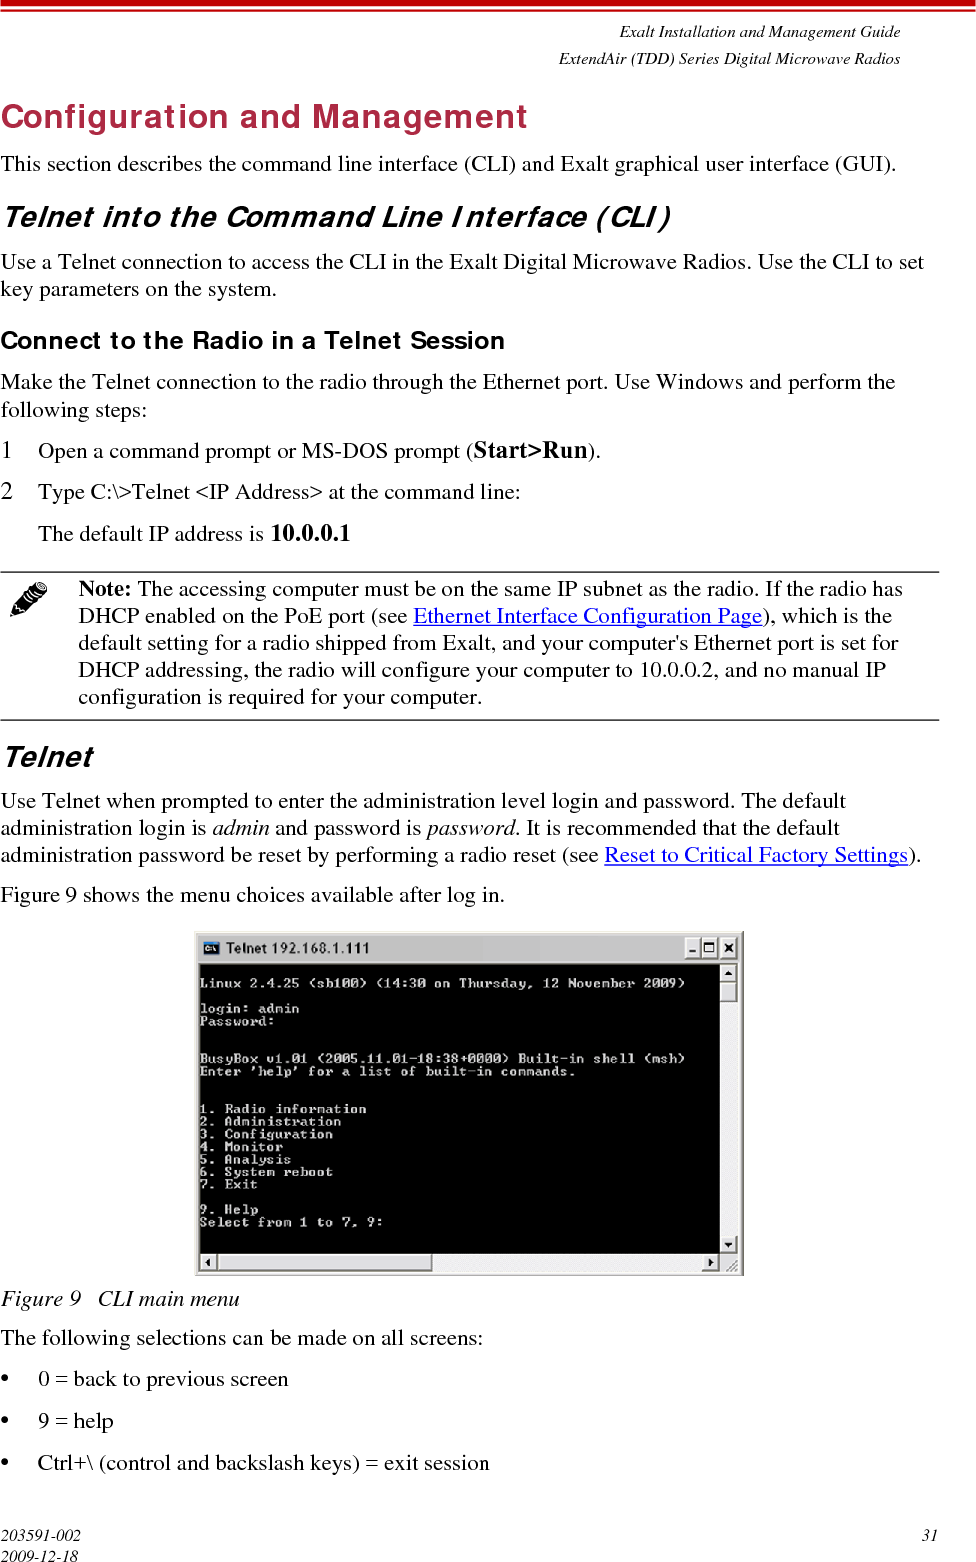 Exalt Installation and Management GuideExtendAir (TDD) Series Digital Microwave Radios203591-002 312009-12-18Configuration and ManagementThis section describes the command line interface (CLI) and Exalt graphical user interface (GUI).Telnet into the Command Line Interface (CLI)Use a Telnet connection to access the CLI in the Exalt Digital Microwave Radios. Use the CLI to set key parameters on the system.Connect to the Radio in a Telnet SessionMake the Telnet connection to the radio through the Ethernet port. Use Windows and perform the following steps:1Open a command prompt or MS-DOS prompt (Start&gt;Run).2Type C:\&gt;Telnet &lt;IP Address&gt; at the command line:The default IP address is 10.0.0.1TelnetUse Telnet when prompted to enter the administration level login and password. The default administration login is admin and password is password. It is recommended that the default administration password be reset by performing a radio reset (see Reset to Critical Factory Settings).Figure 9 shows the menu choices available after log in.Figure 9   CLI main menuThe following selections can be made on all screens:•0 = back to previous screen•9 = help•Ctrl+\ (control and backslash keys) = exit sessionNote: The accessing computer must be on the same IP subnet as the radio. If the radio has DHCP enabled on the PoE port (see Ethernet Interface Configuration Page), which is the default setting for a radio shipped from Exalt, and your computer&apos;s Ethernet port is set for DHCP addressing, the radio will configure your computer to 10.0.0.2, and no manual IP configuration is required for your computer. 